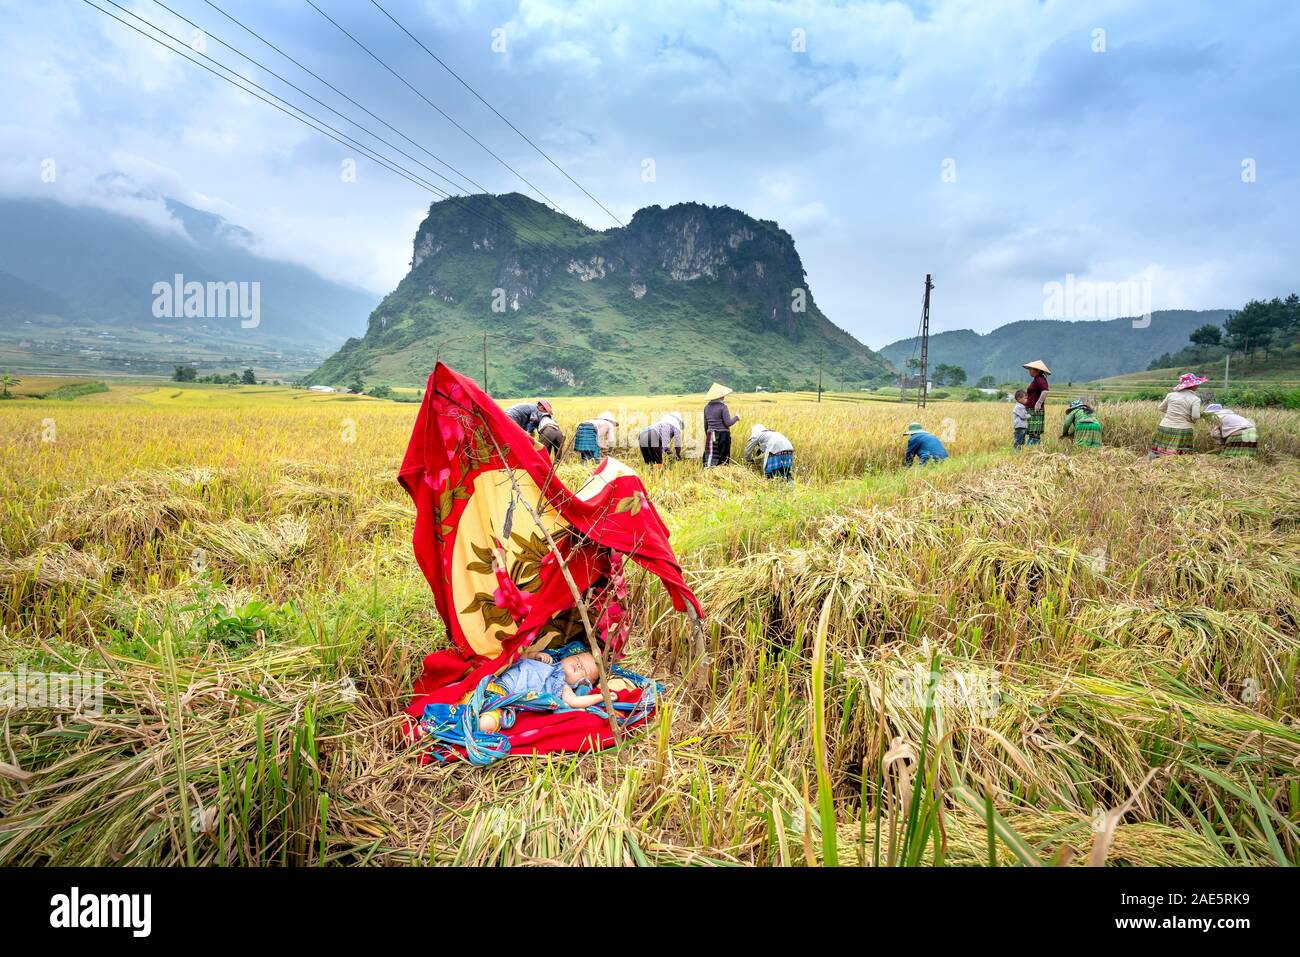 Lai Chau Province, Vietnam - September 20, 2019: Images of ethnic minority babies sleeping in a sun-shielded paddy field for parents to have time to h Stock Photo